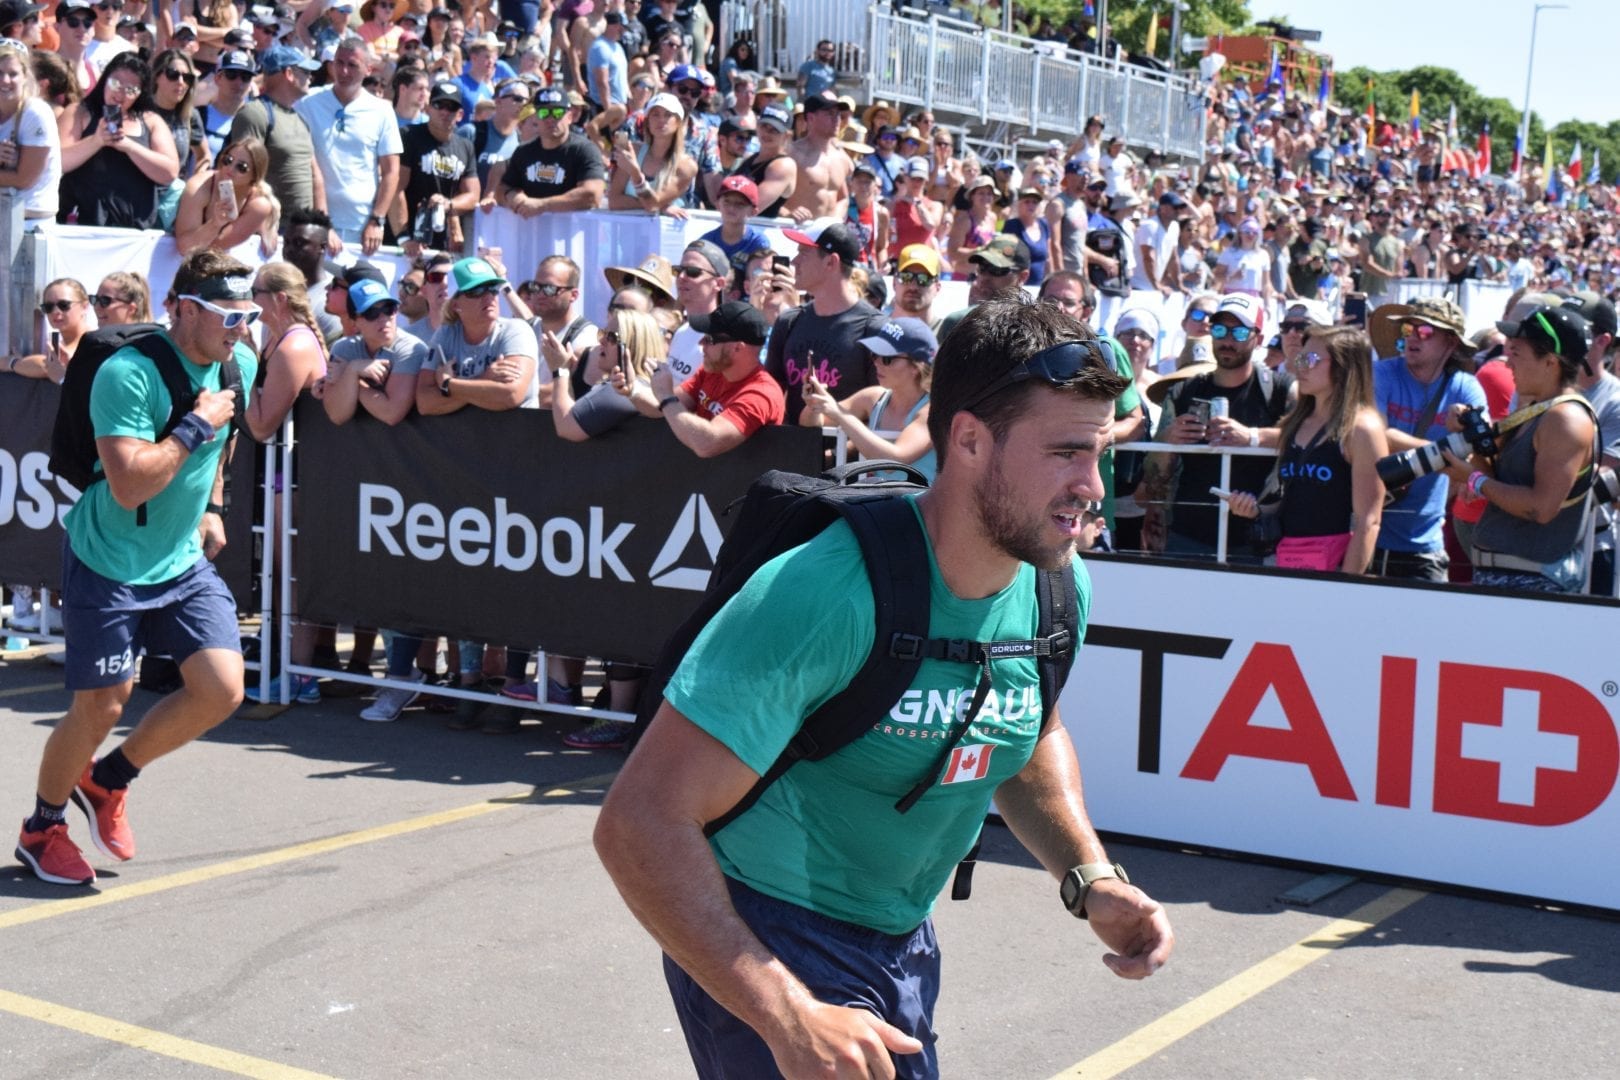 Alex Vigneault of Canada completes the Ruck Run event at the 2019 CrossFit Games